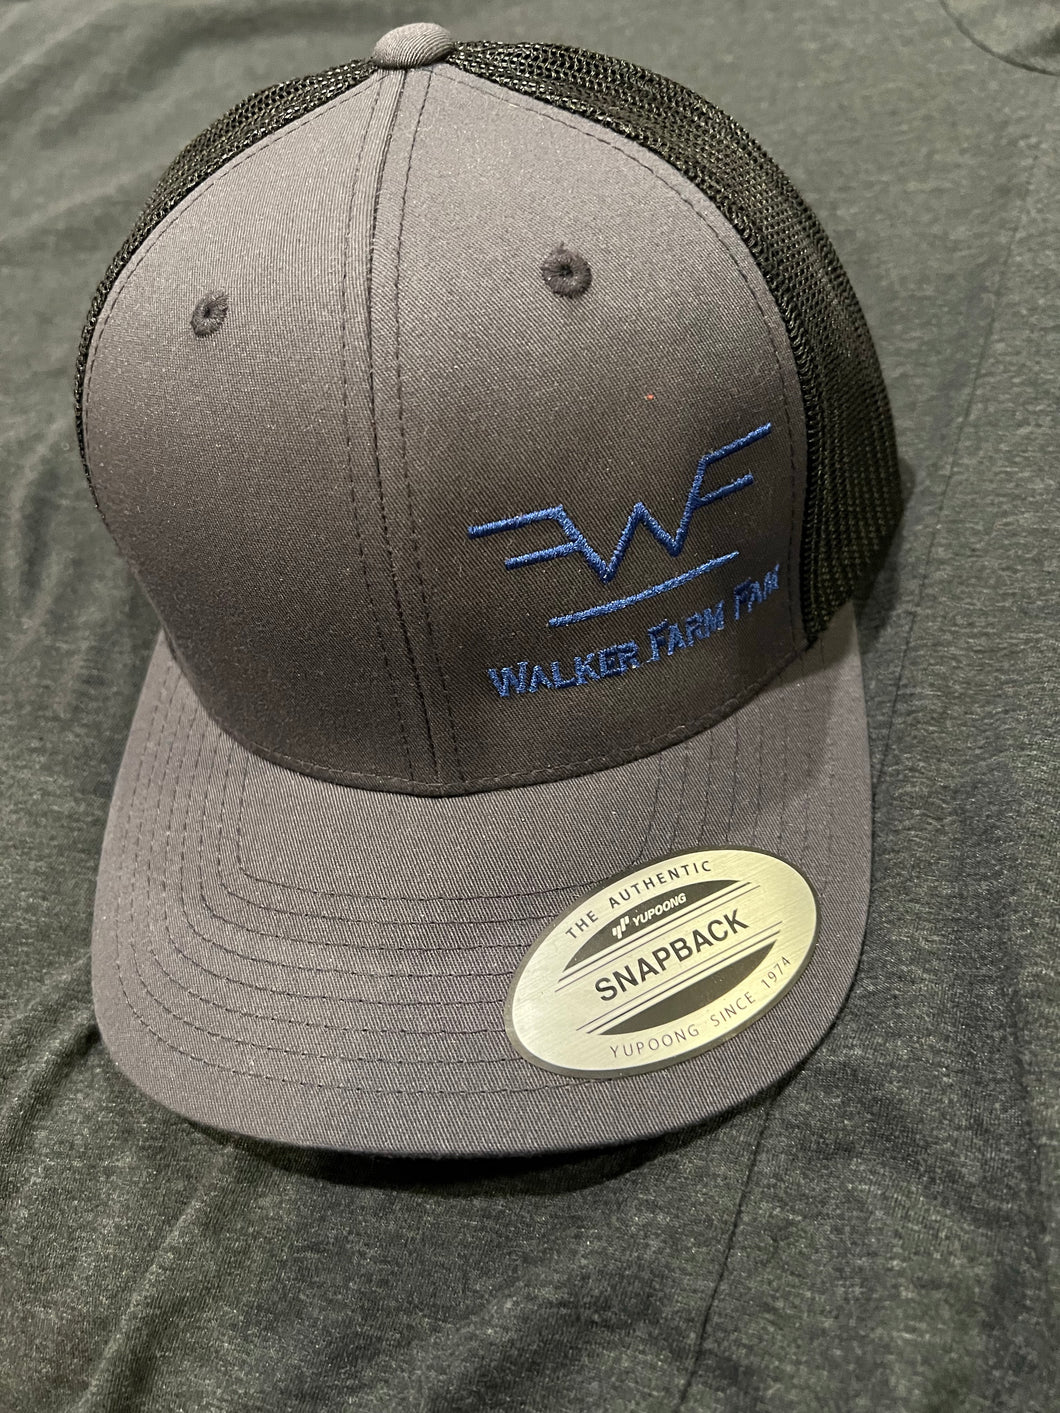 WFF Brand Hat dark gray bill / front and blue writing, black back